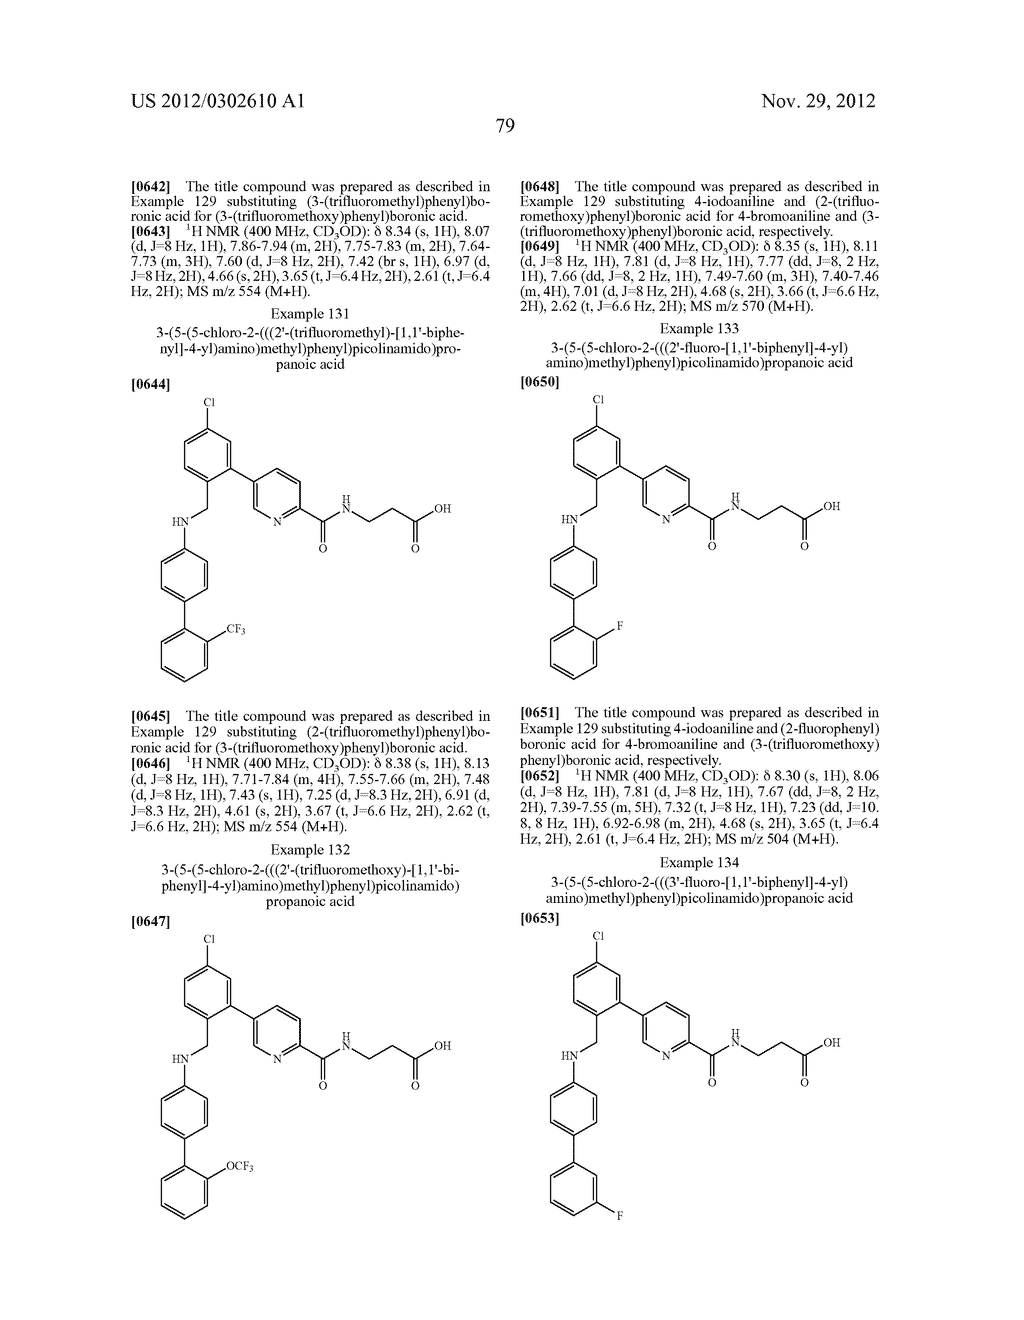 PICOLINAMIDO-PROPANOIC ACID DERIVATIVES USEFUL AS GLUCAGON RECEPTOR     ANTAGONISTS - diagram, schematic, and image 80